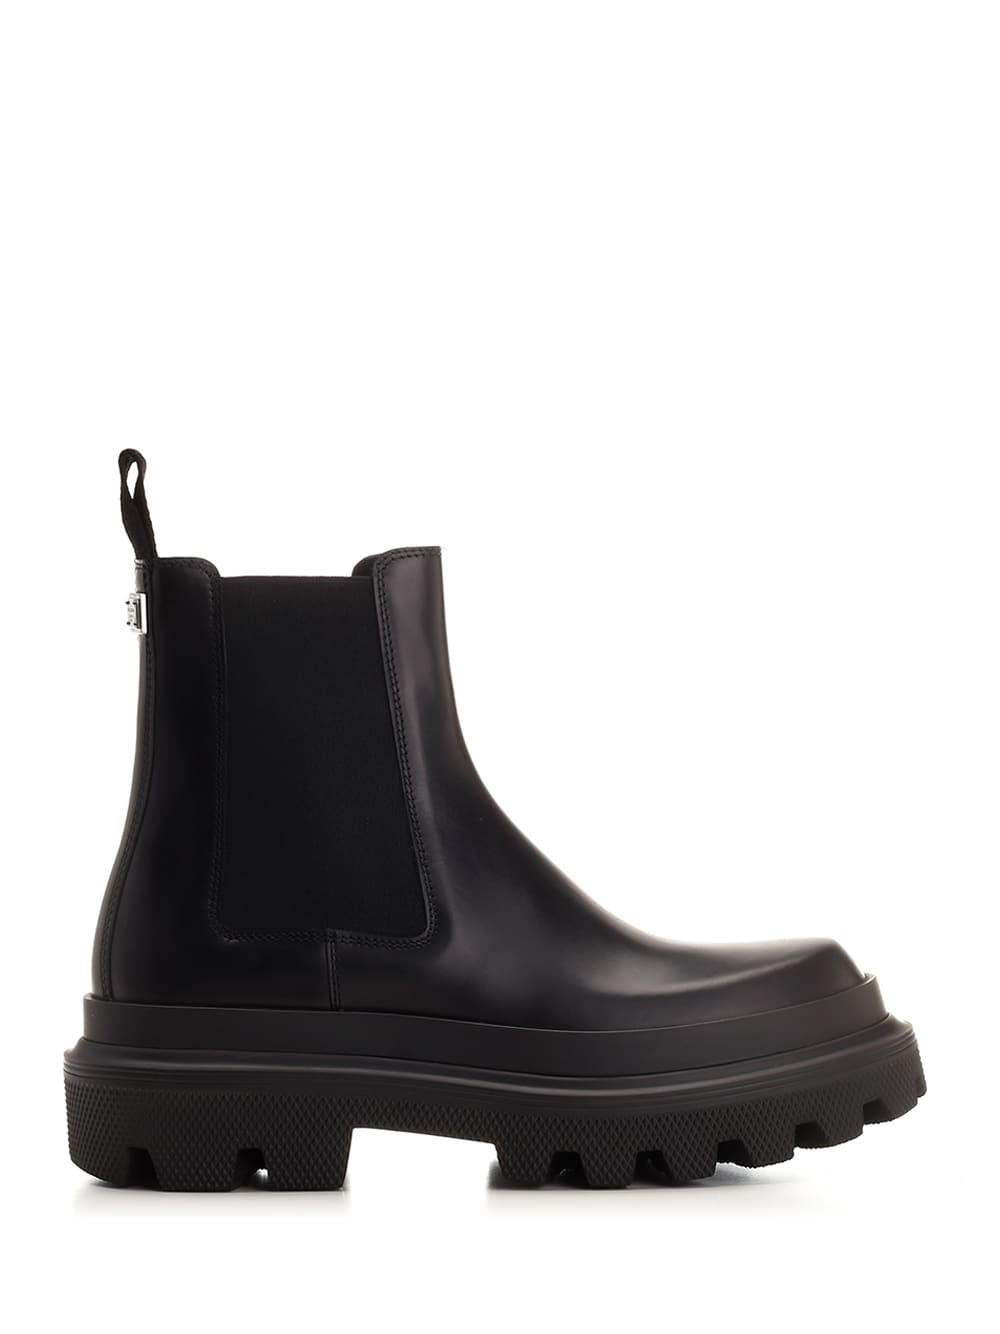 Dolce & Gabbana Brushed Leather Ankle Boot In Black